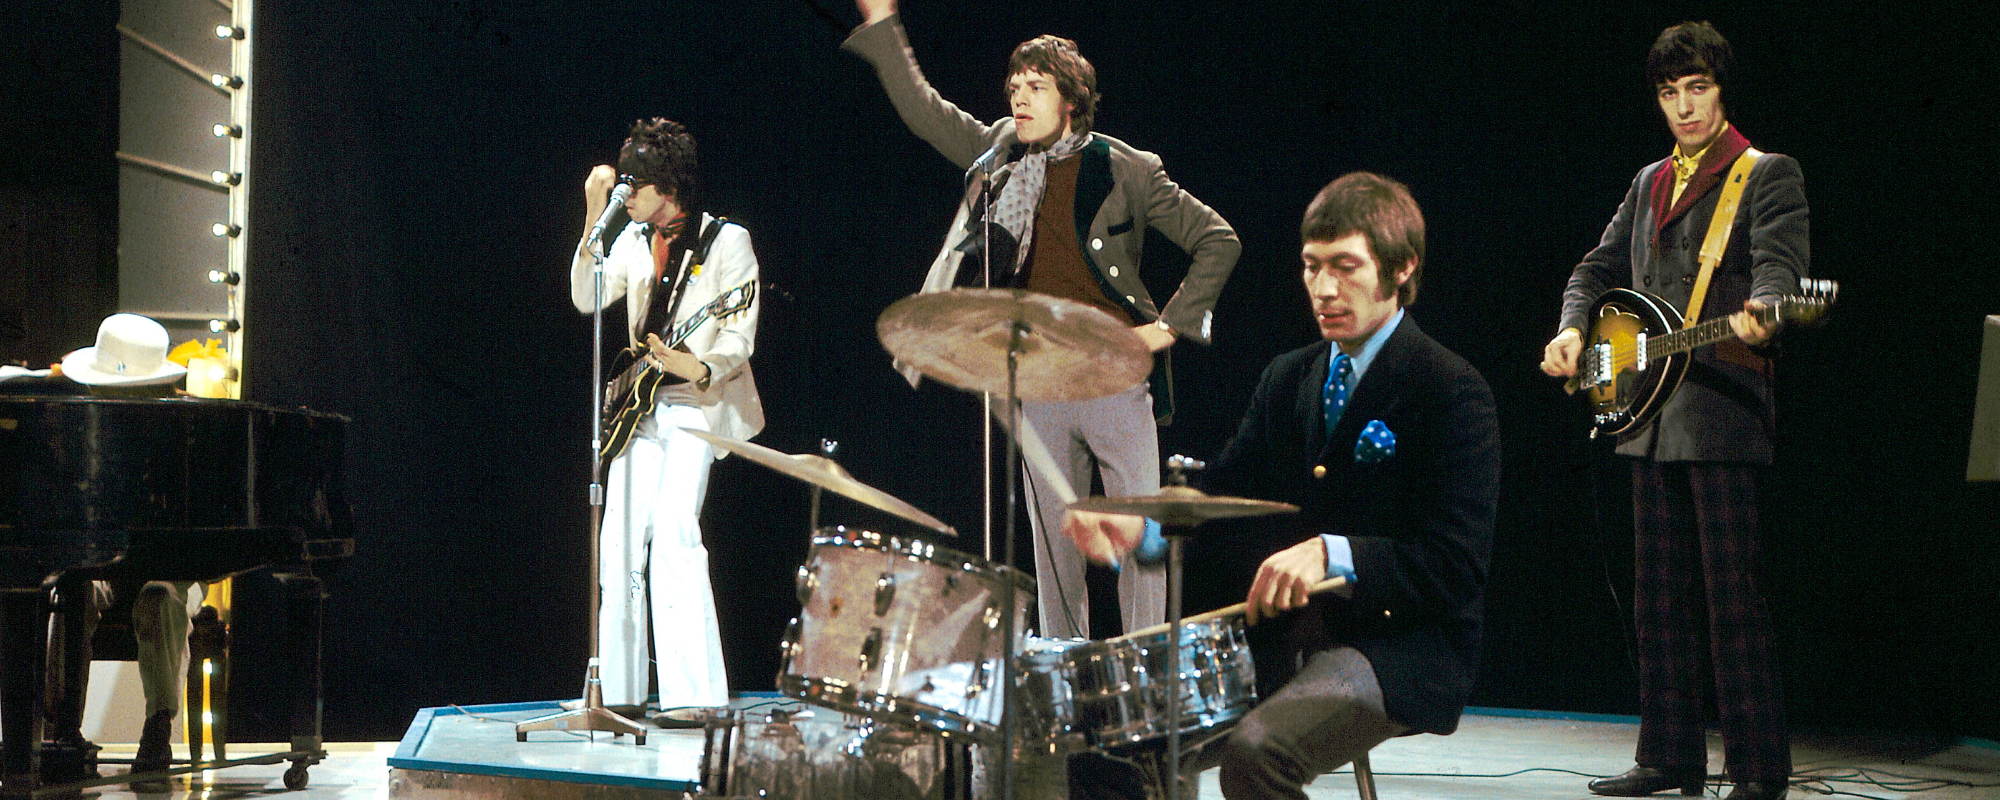 Drumming Legends: 5 Iconic Drummers Who Changed Rock Music